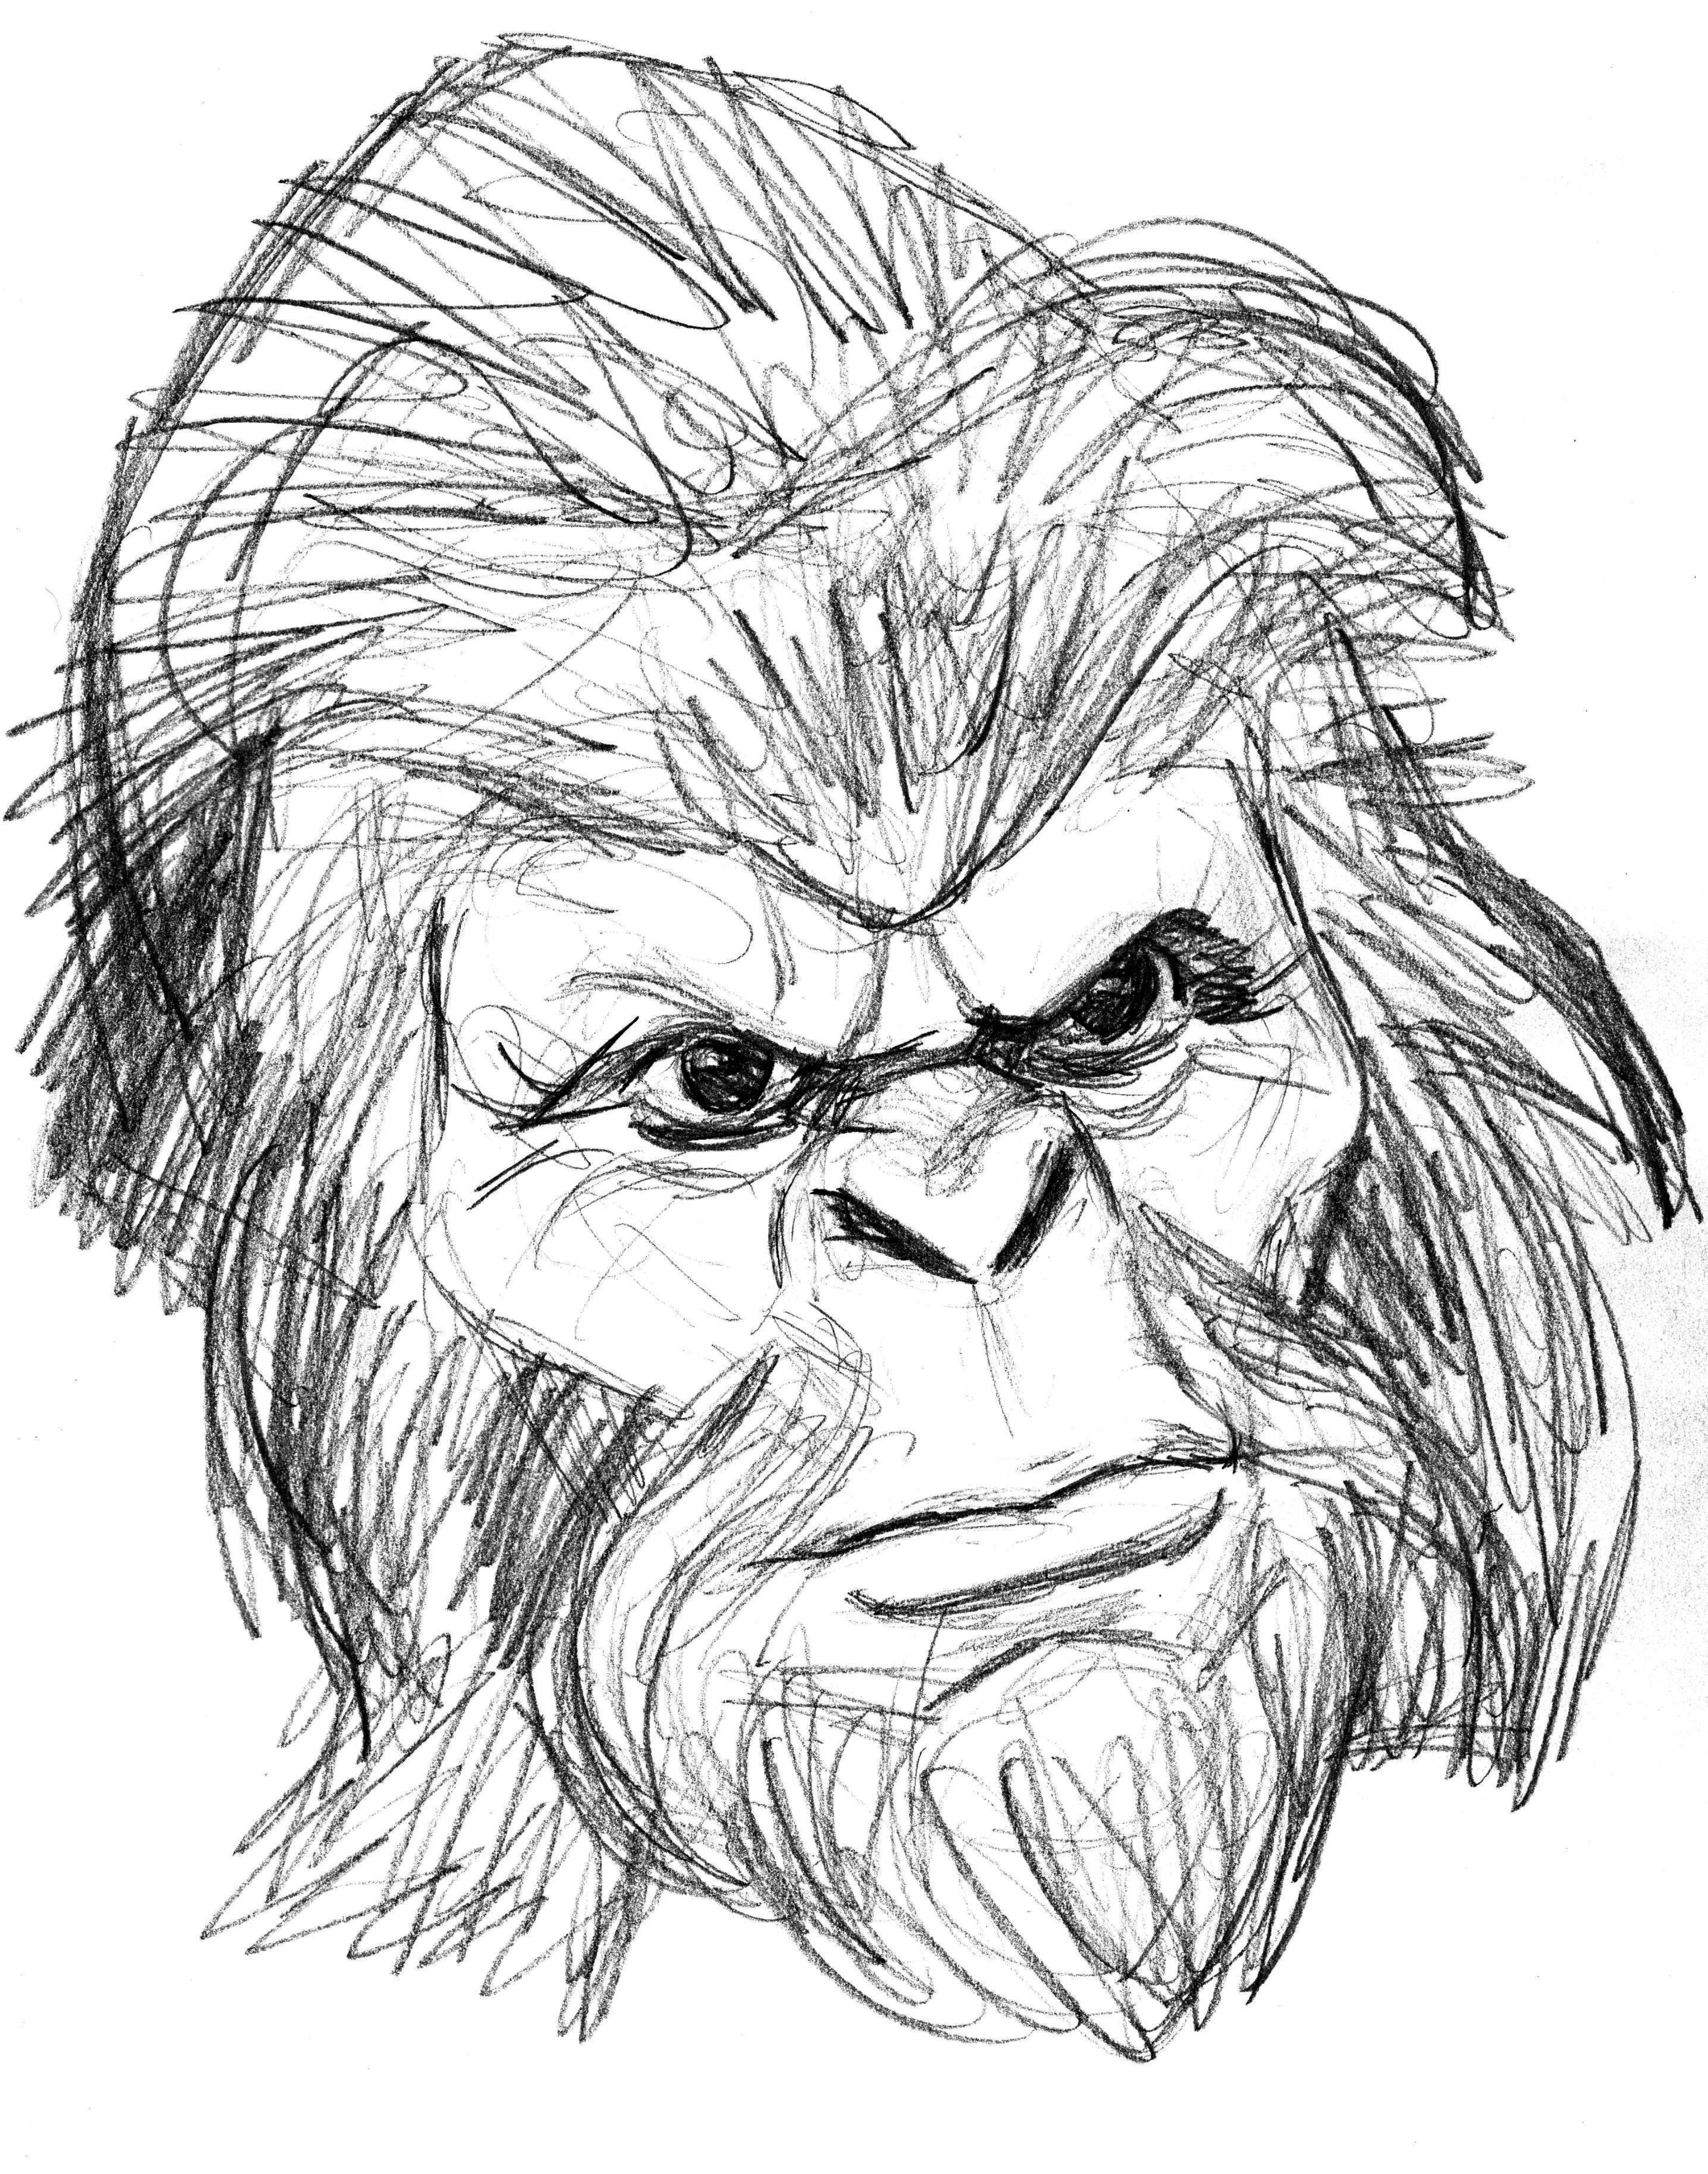 Bigfoot Drawings Pictures Tom Bancroft BIGFOOT sketches Mohammad Burke